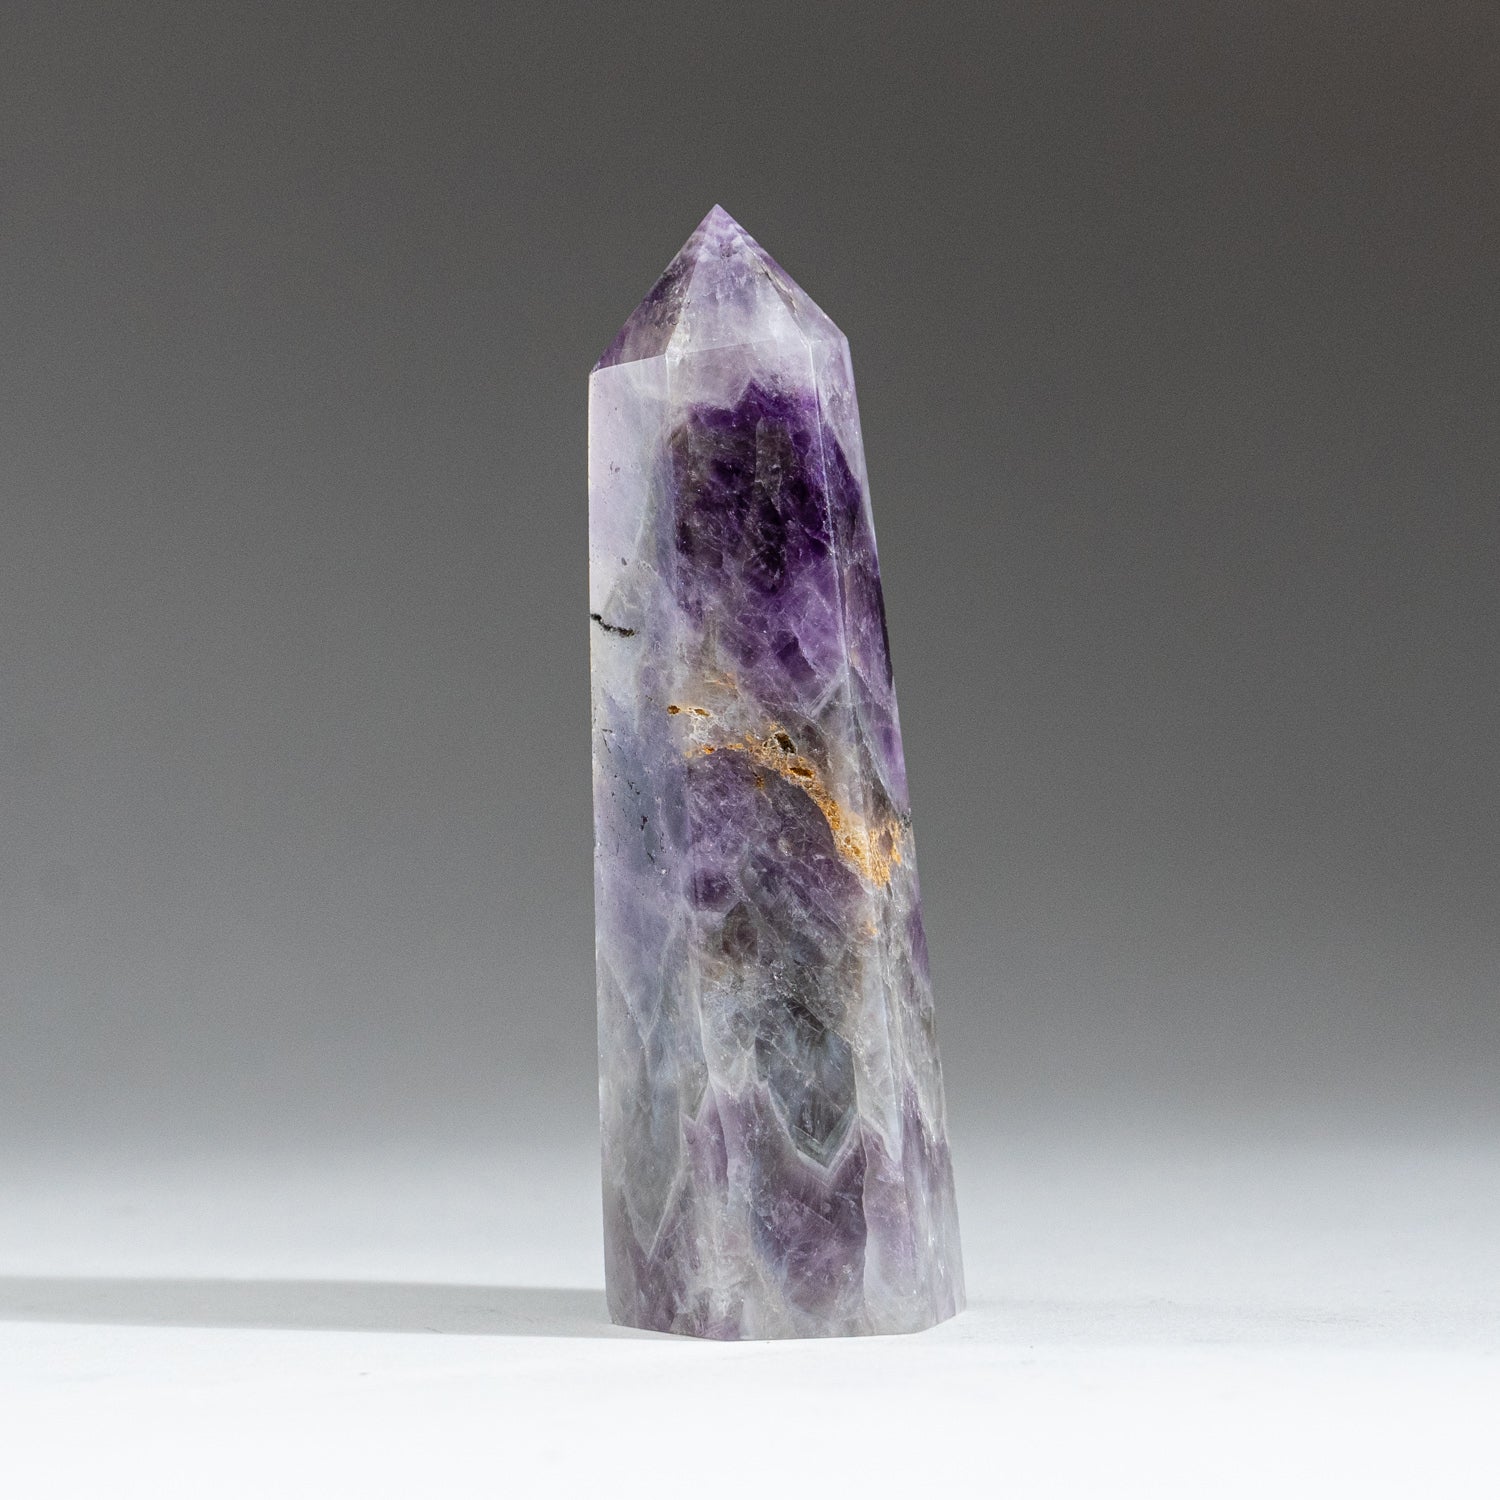 Polished Chevron Amethyst Point from Brazil (179.5 grams)